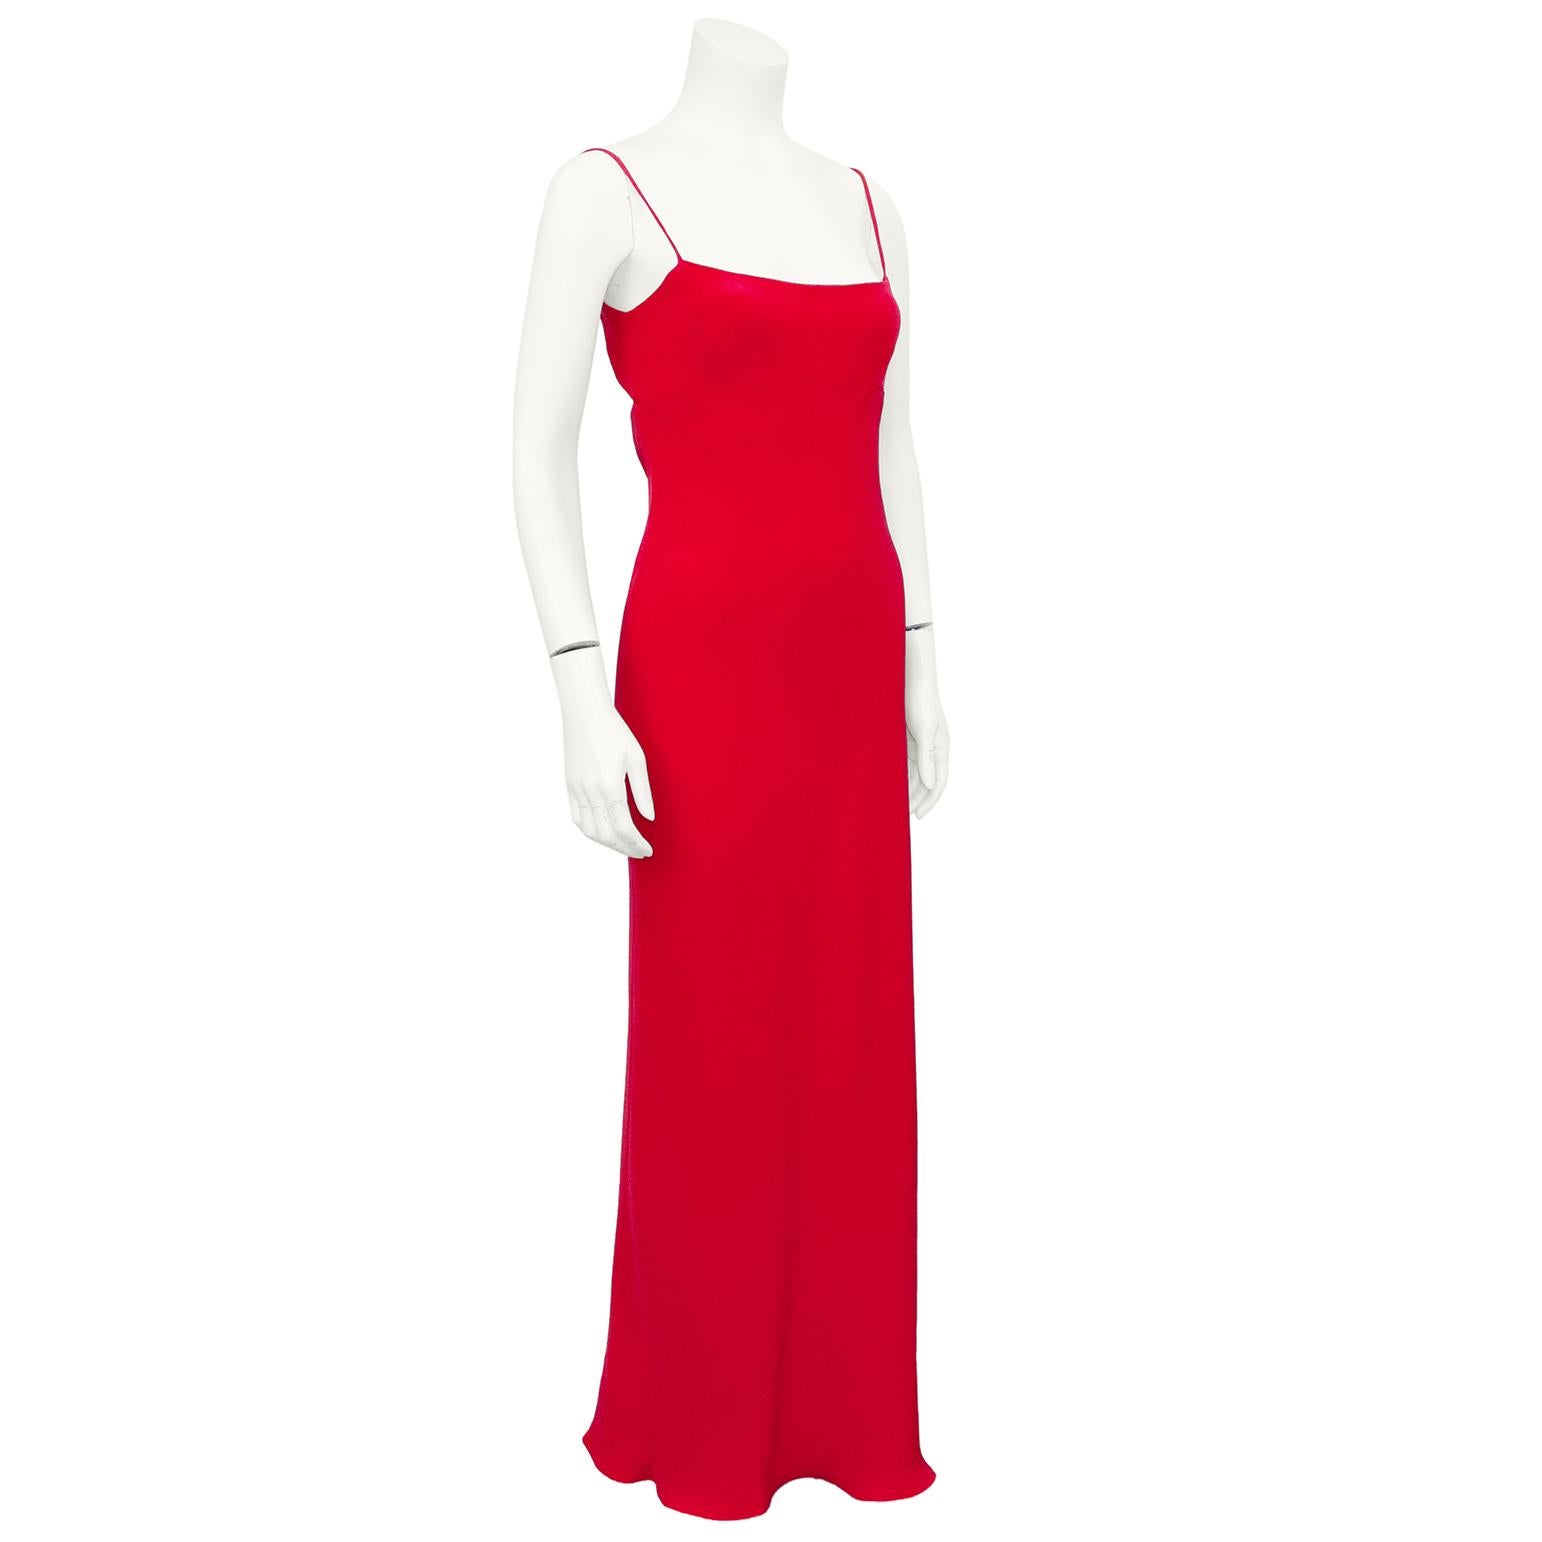 This Armani red silk gown is quintessentially 1990s. Very sexy sheath silhouette, with spaghetti straps, a square neckline and an empire waist seam with darts at bust. Open back with a tie making the bust adjustable. The expert craftsmanship and